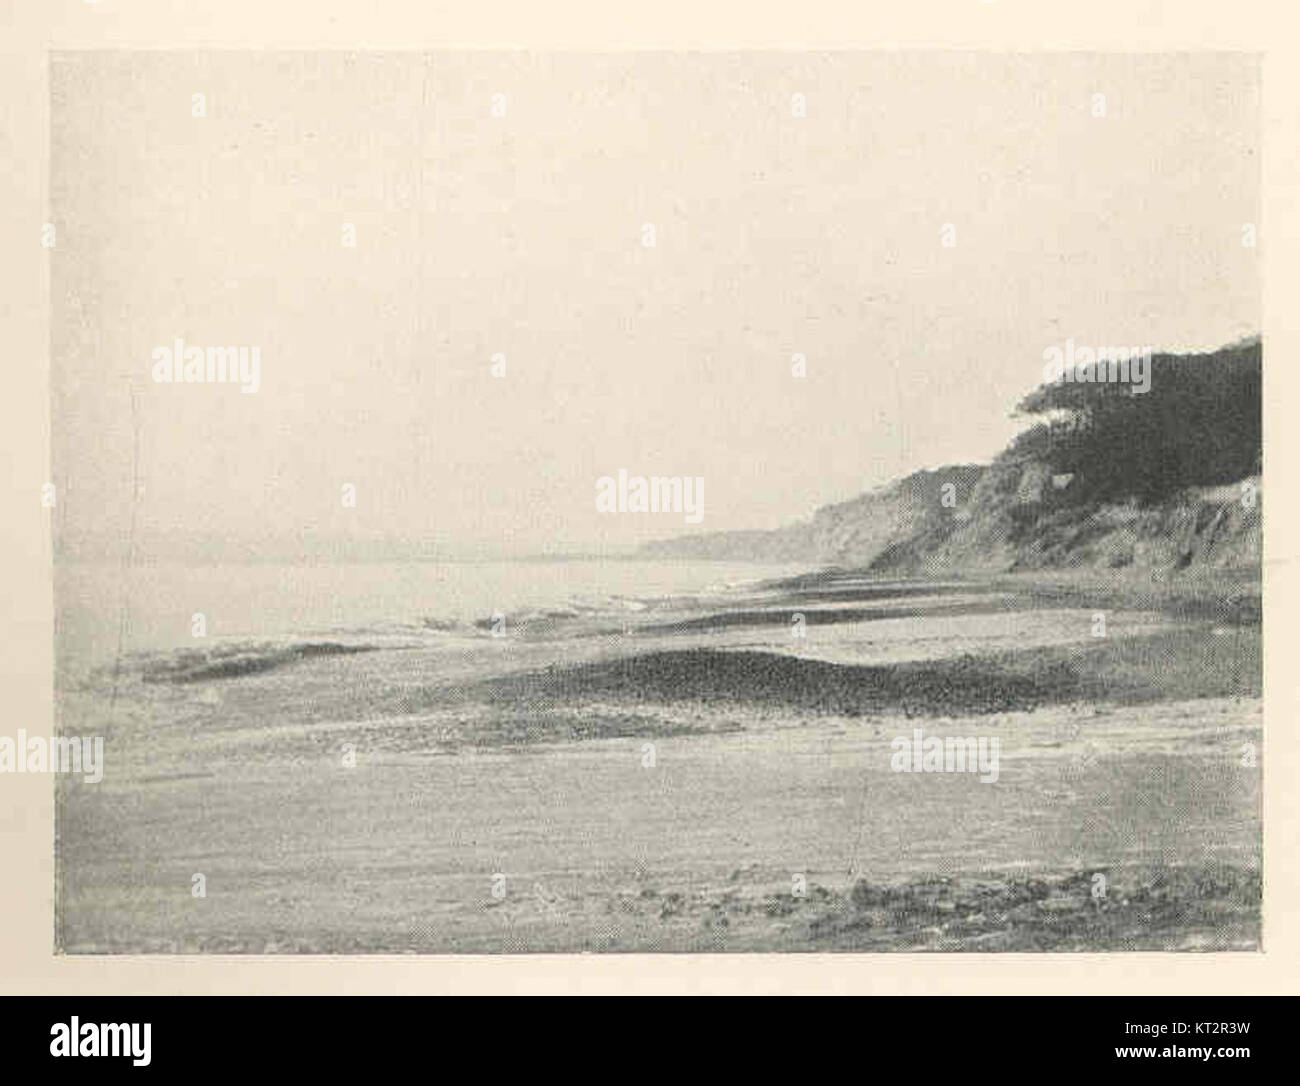 37991 Shingle Sorted From Sand by the Wash of a Heavy Swell (Branksome Chine, Near Bournemouth) Stock Photo